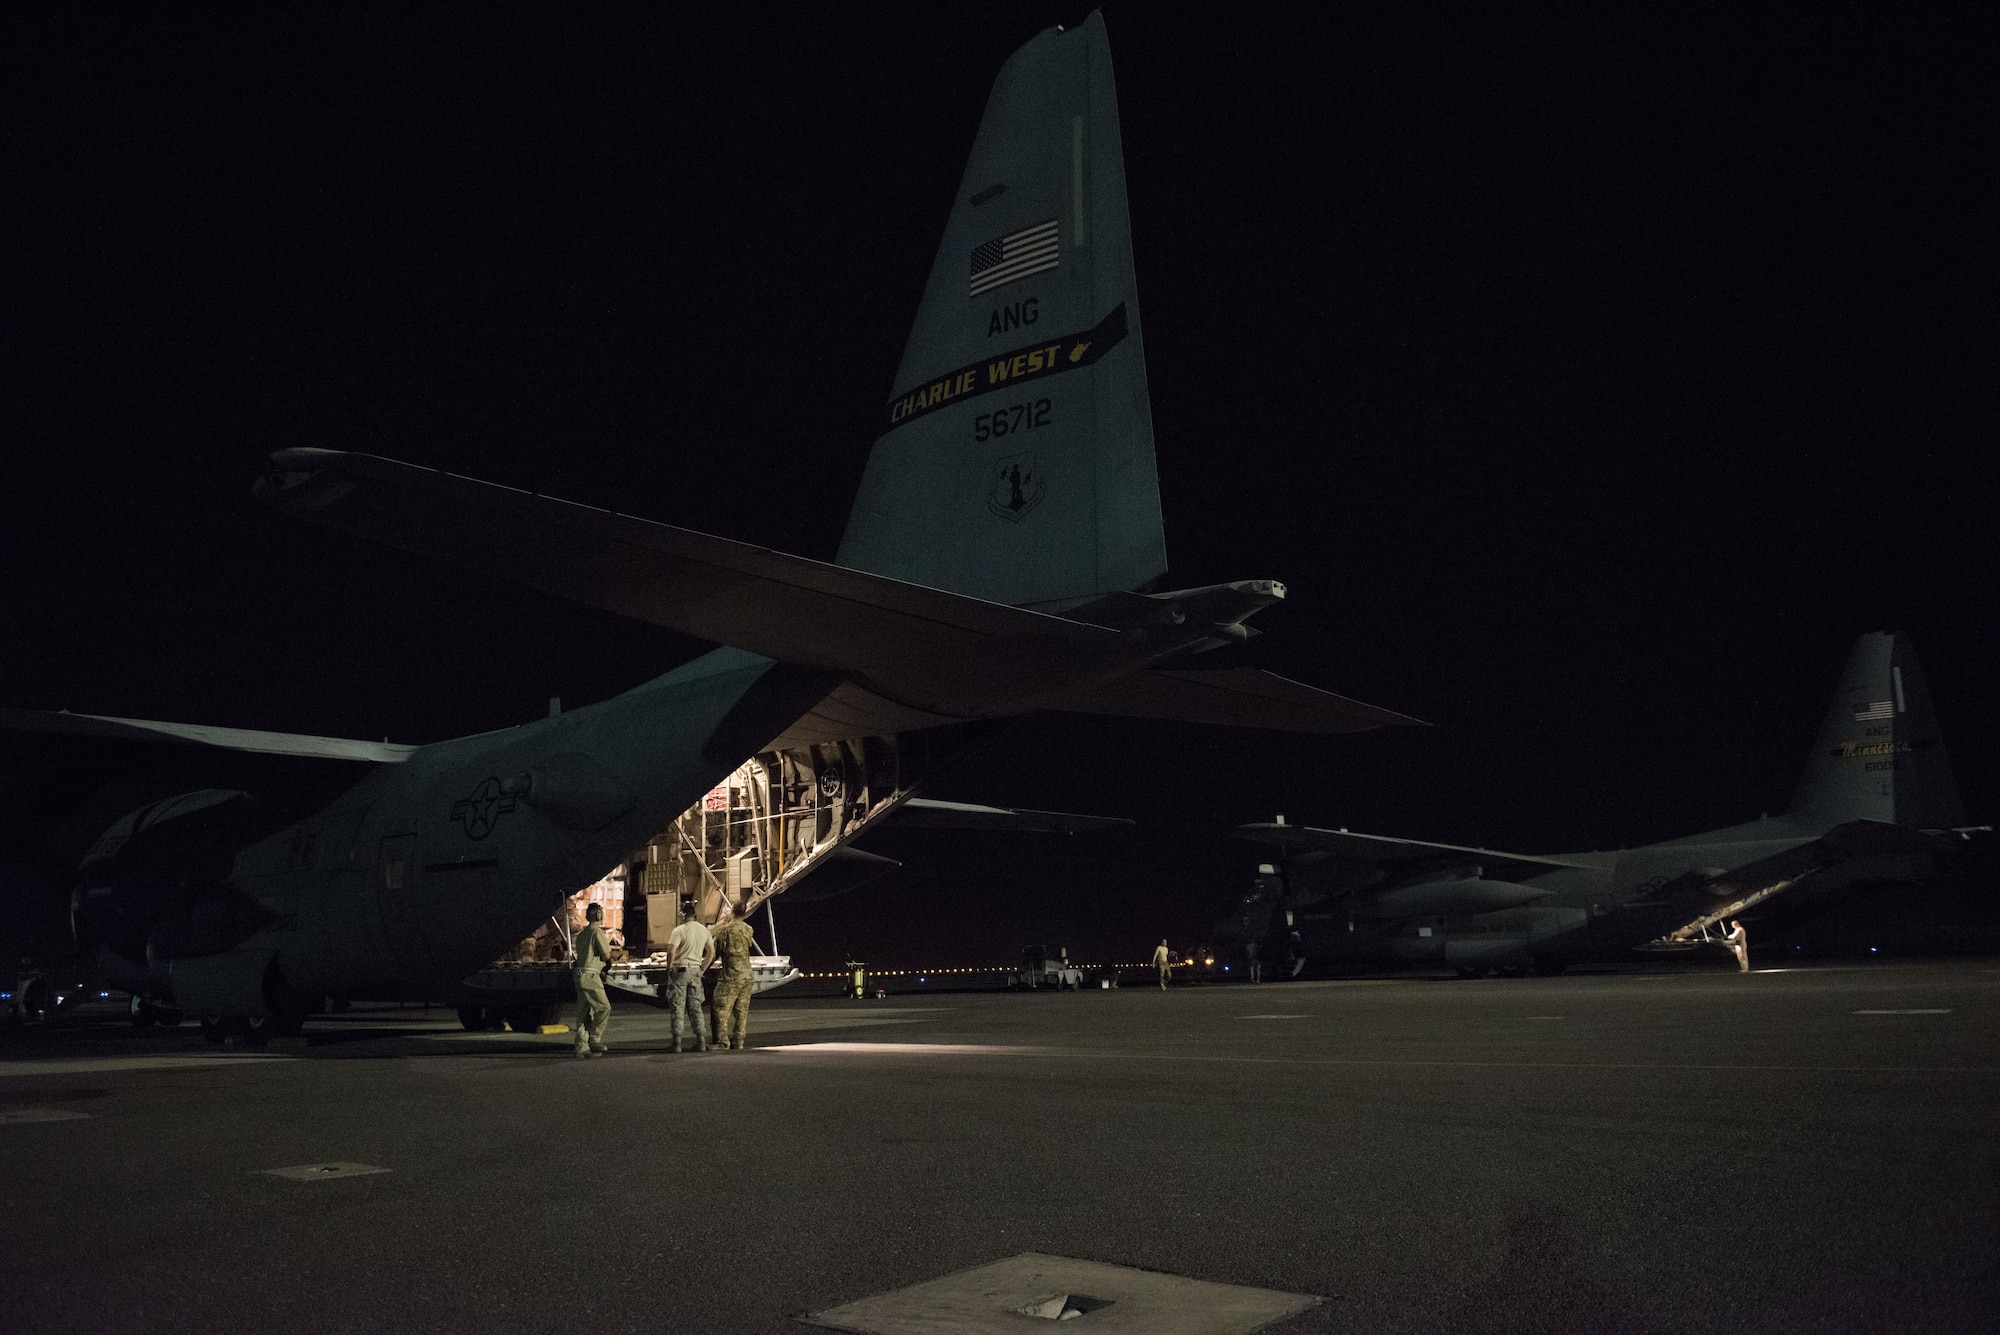 C-130H Hercules aircraft deployed from the 130th Airlift Wing of Charleston, West Virginia and the 133rd Airlift Wing of St. Paul, Minnesota sit on the flightline prior to departing on a combat mission at an undisclosed location in Southwest Asia, July 14, 2017. Air National Guardsmen and their aircraft, deployed in support of Combined Joint Task Force – Operation Inherent Resolve, execute daily airlift missions out of one of the busiest air bases in the U.S. Air Forces Central Command area of responsibility. (U.S. Air Force photo by Tech. Sgt.  Jonathan Hehnly)